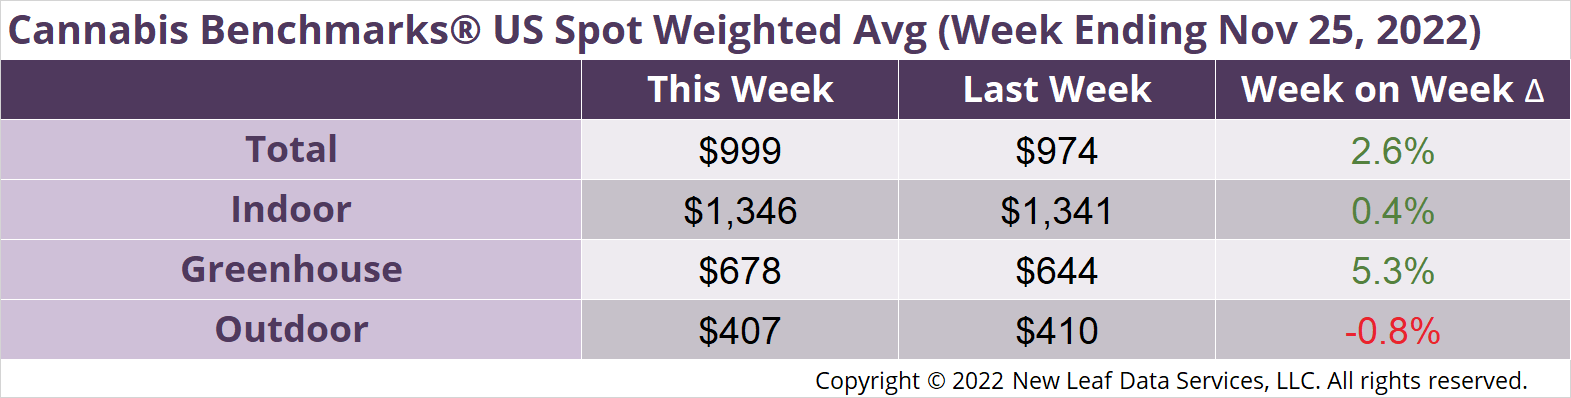 Cannabis Benchmarks U.S. Spot Weighted Average Prices November 25, 2022